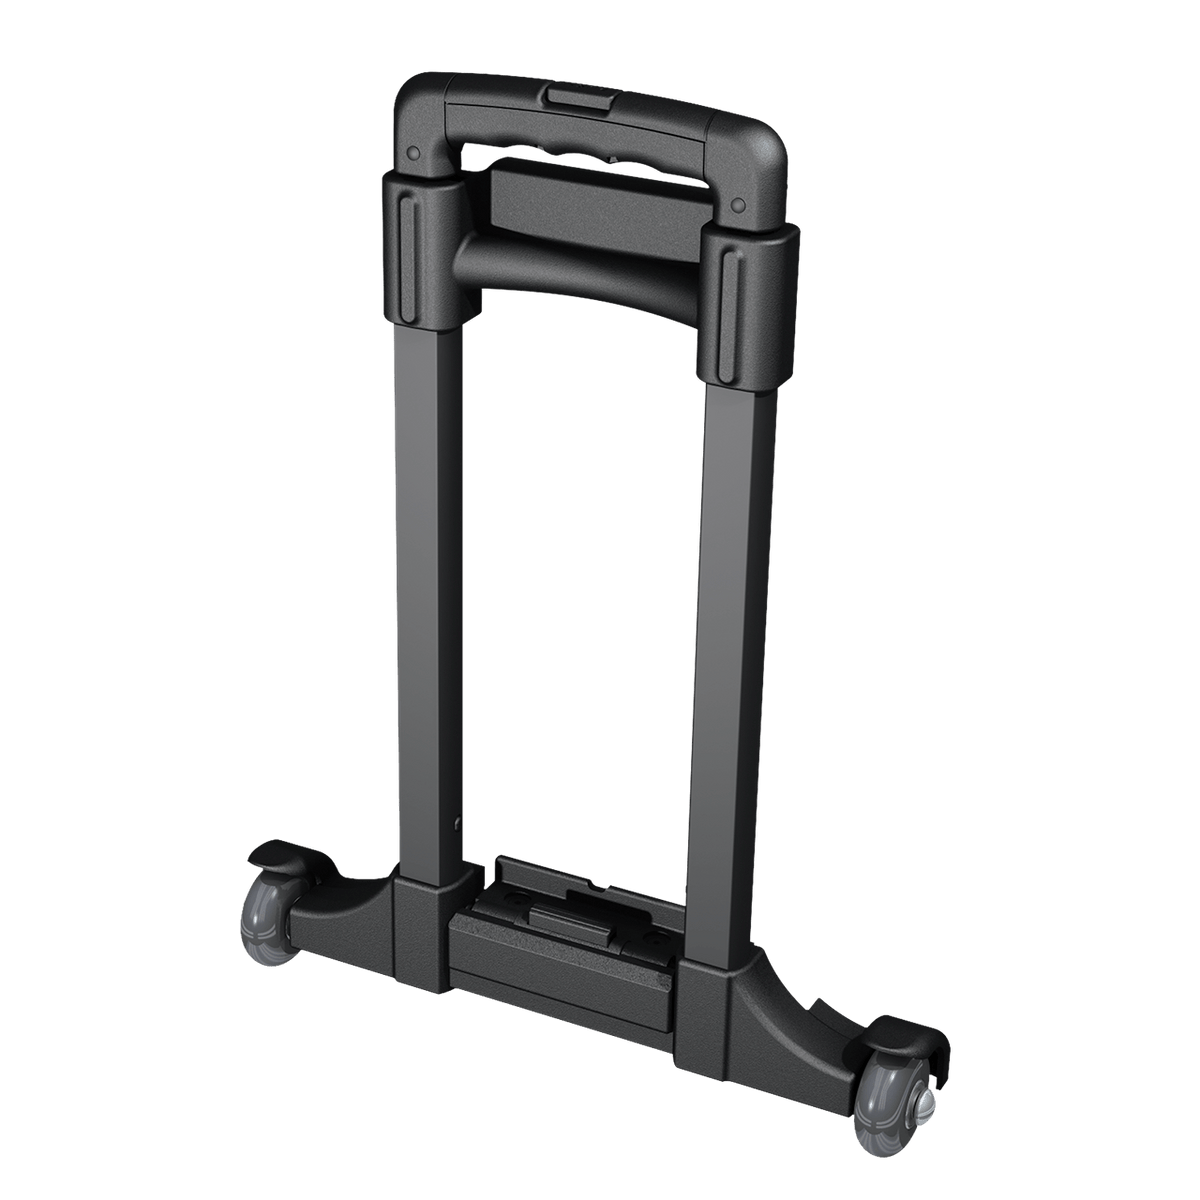 Black 3 stage removable surface mount extension handle with wheels, not extended 3/4 angle